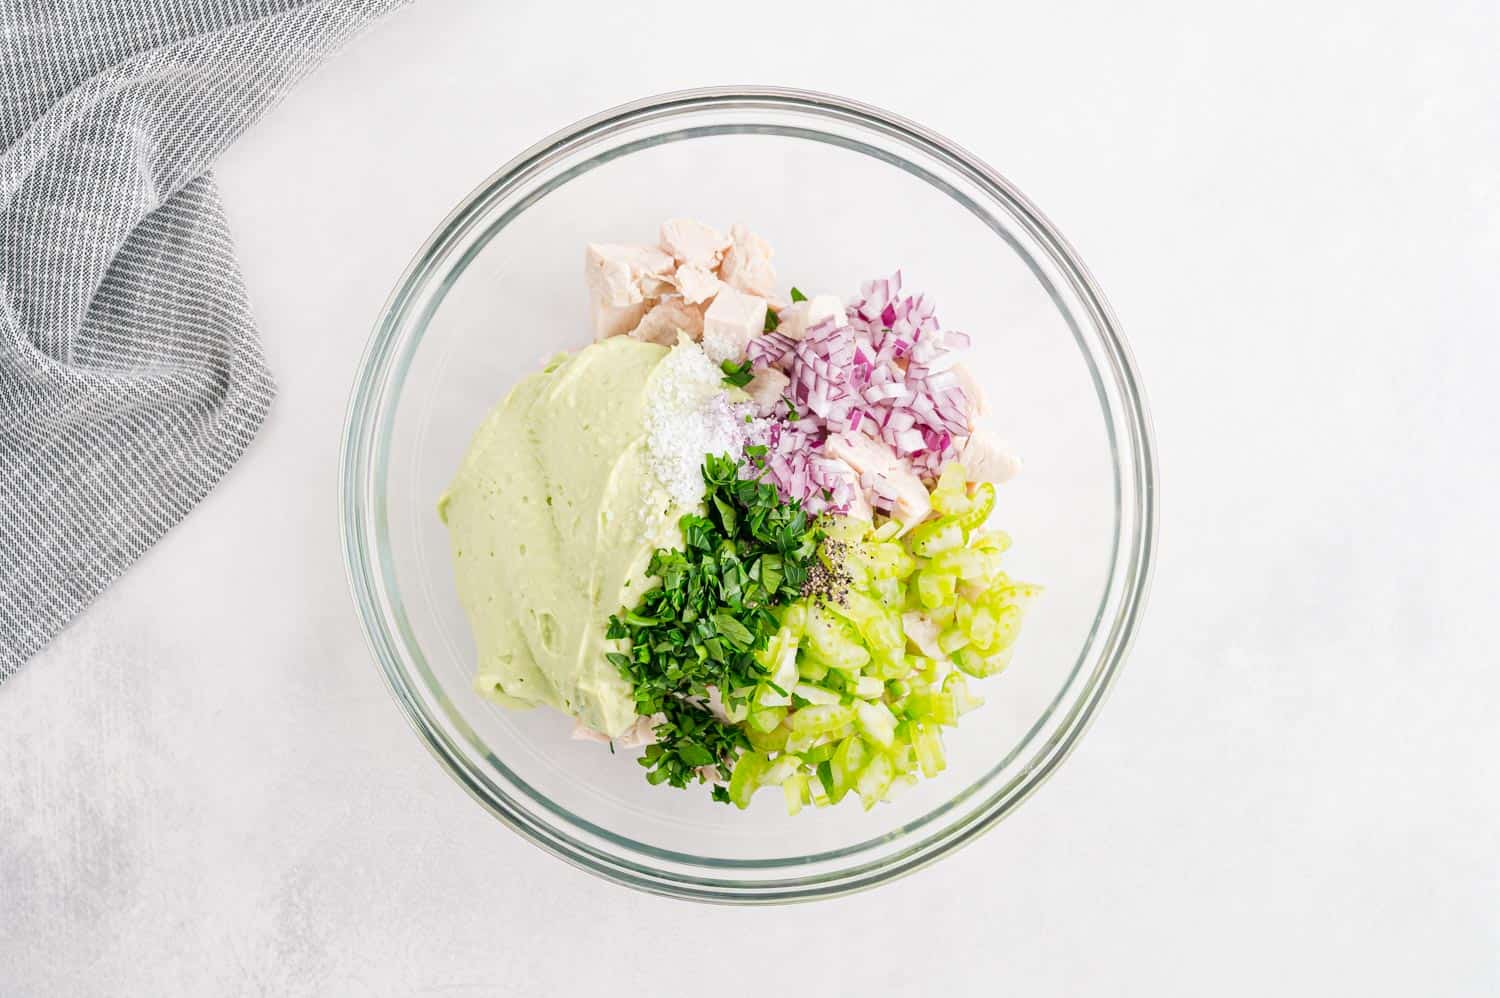 Unmixed chicken salad in clear glass bowl.